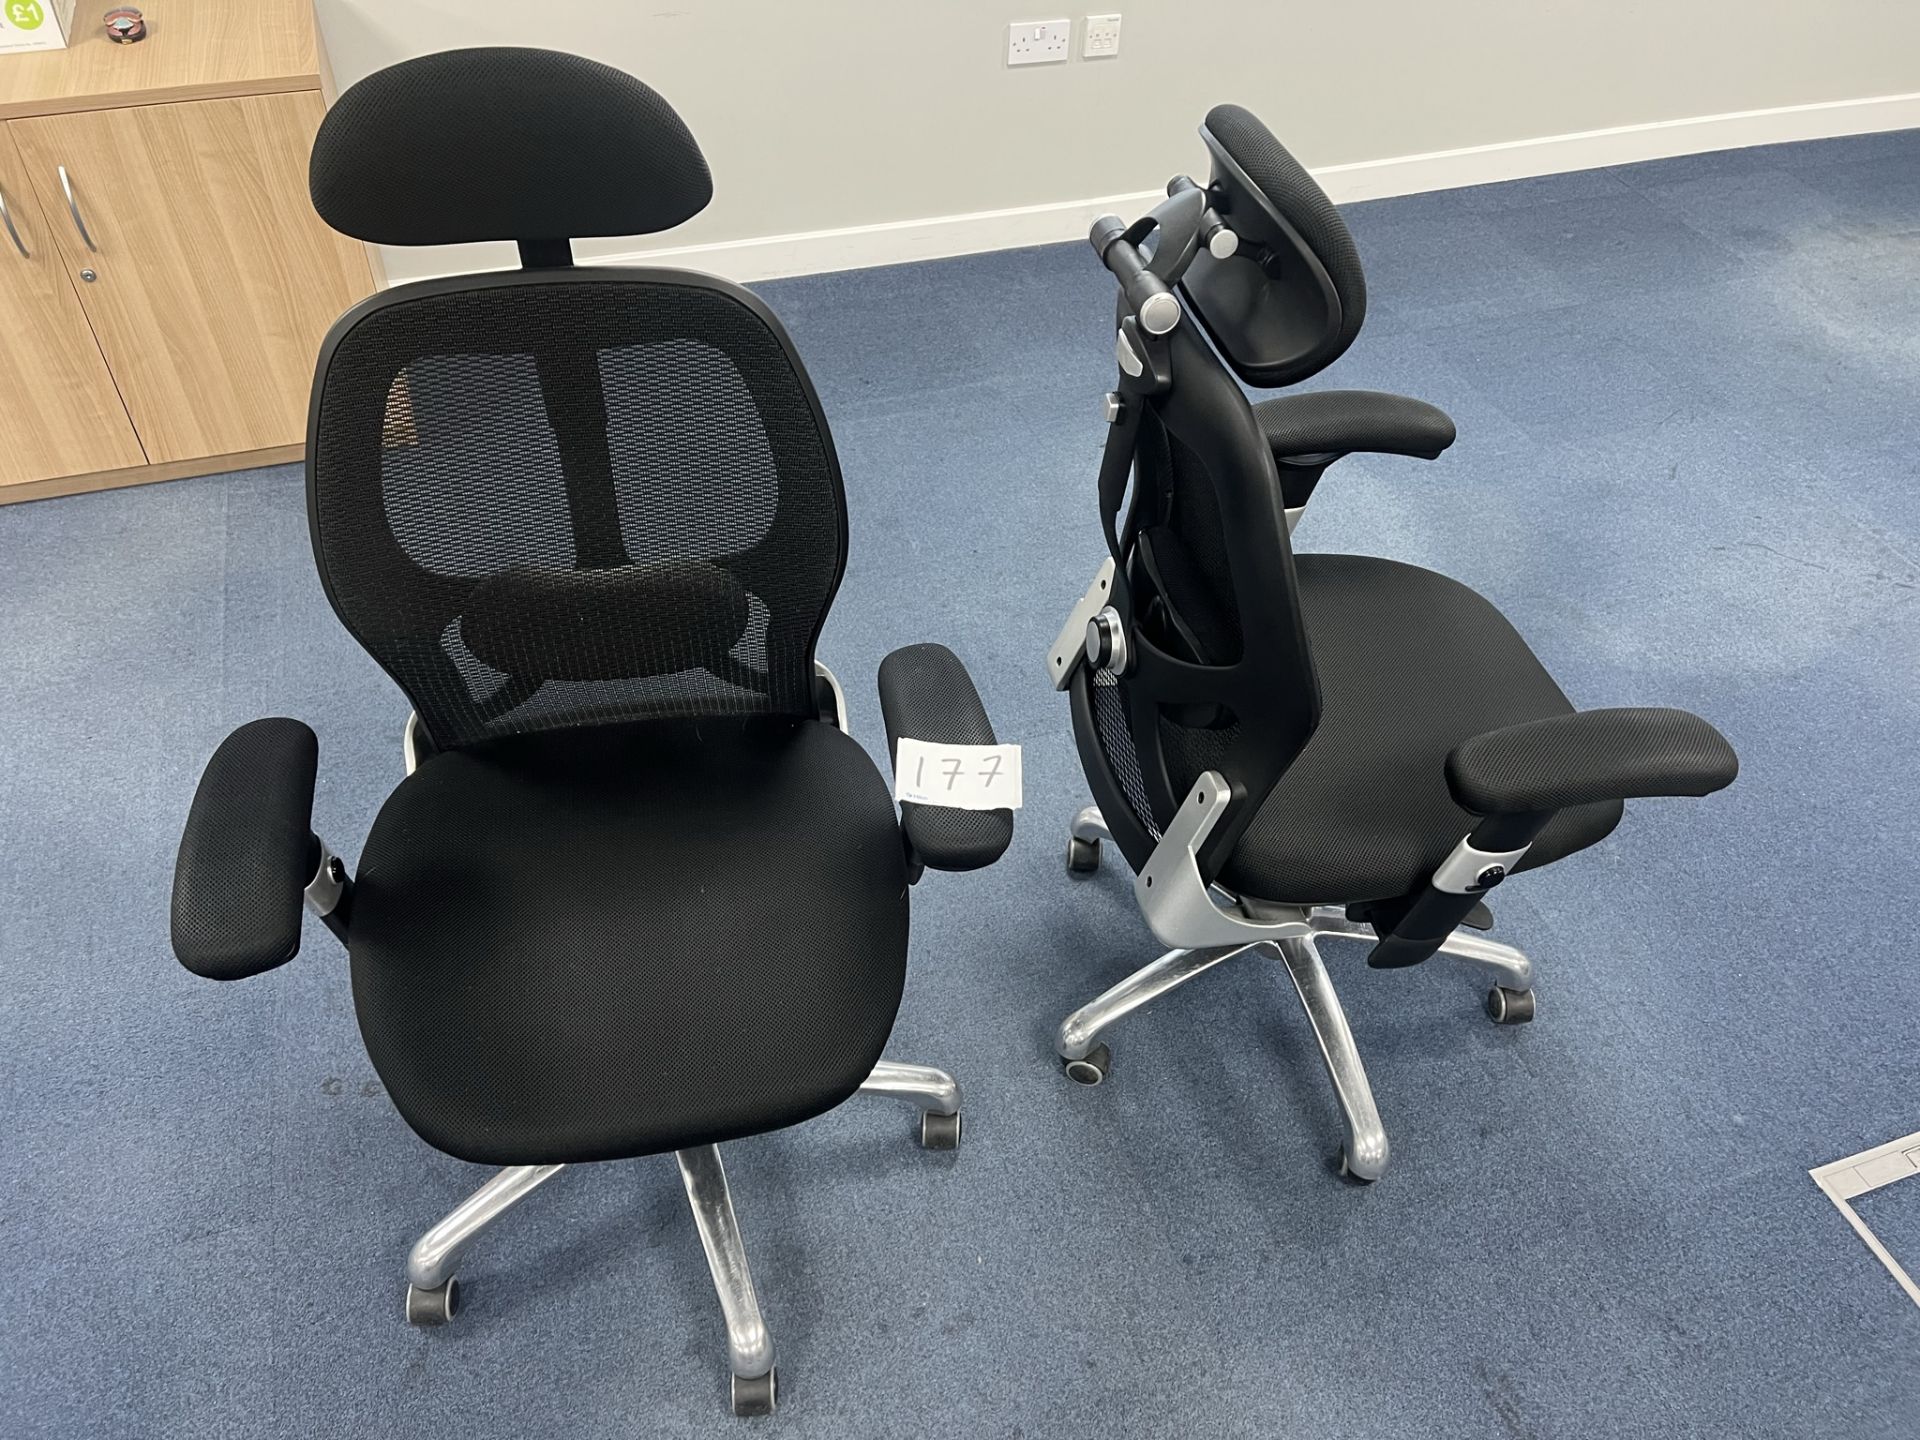 2 Quality Office Chairs